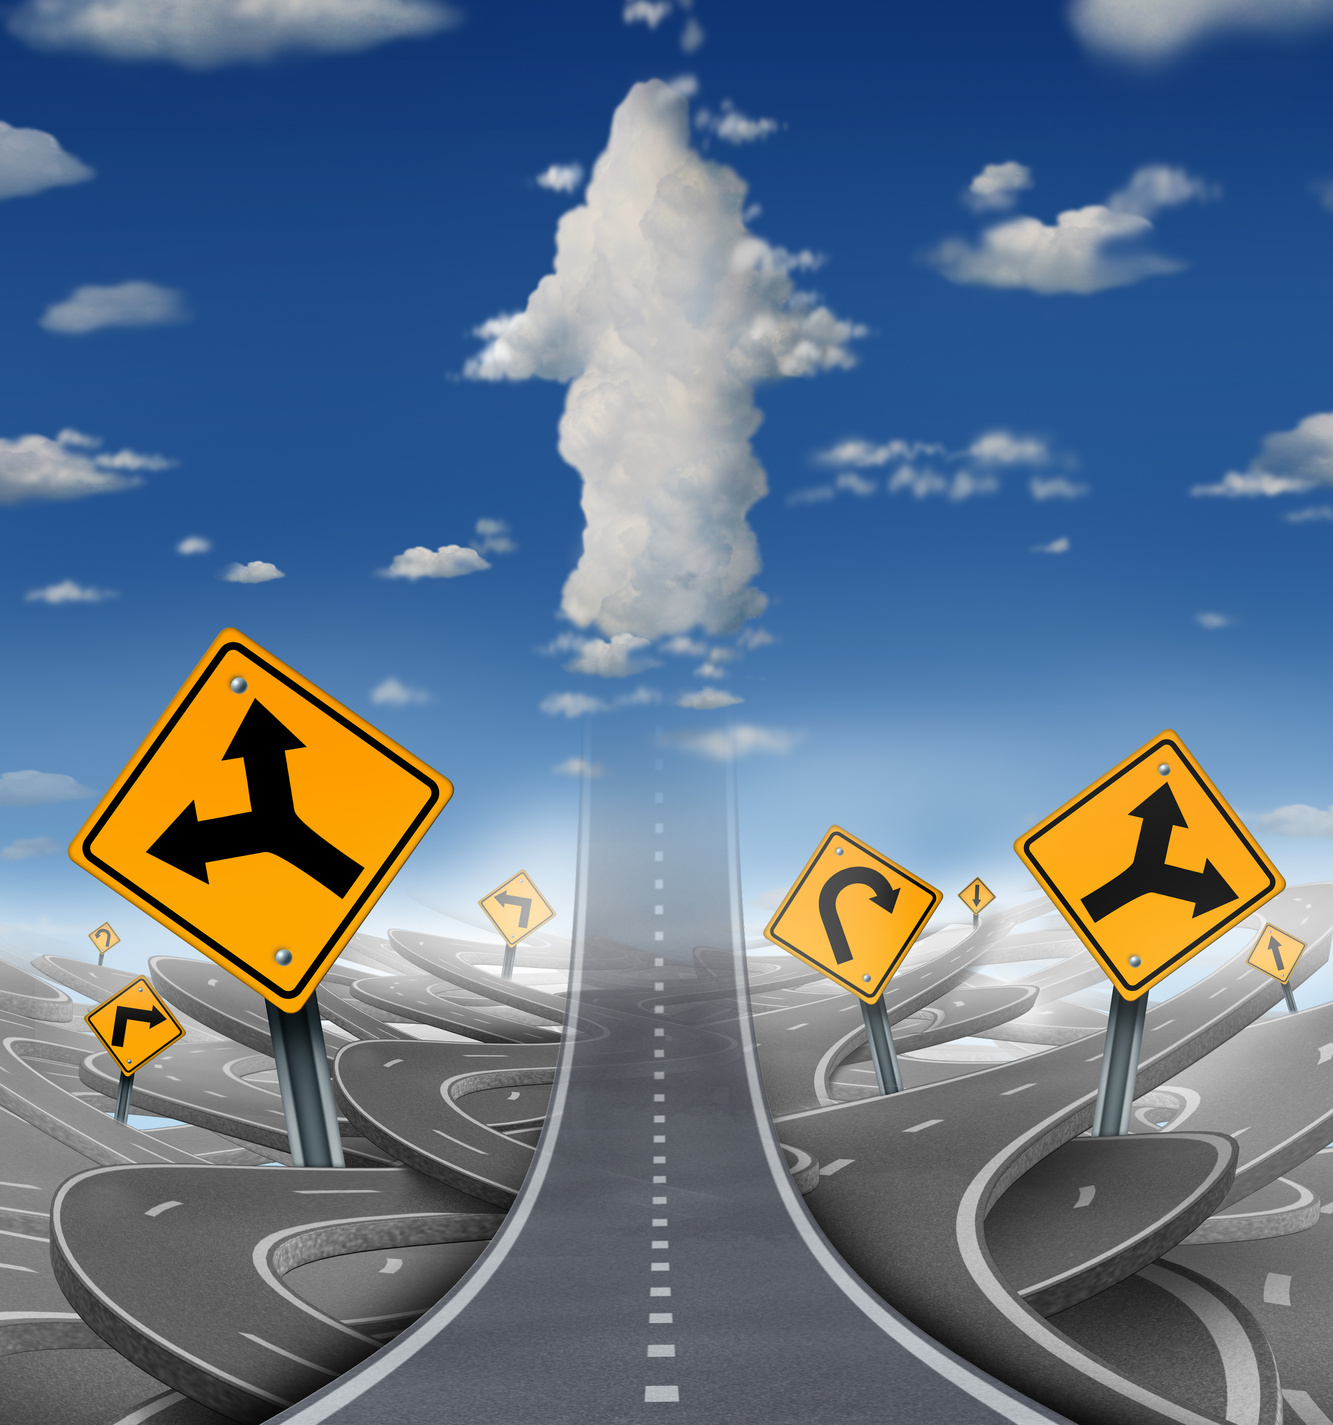 Focused Determination Success Concept With A Road Or Highway Going Forward Away From A Group Of Confusing Distractions Fading Into The Sky With Clouds Shaped As An Upward Arrow As A Business Symbol Of Financial Freedom.